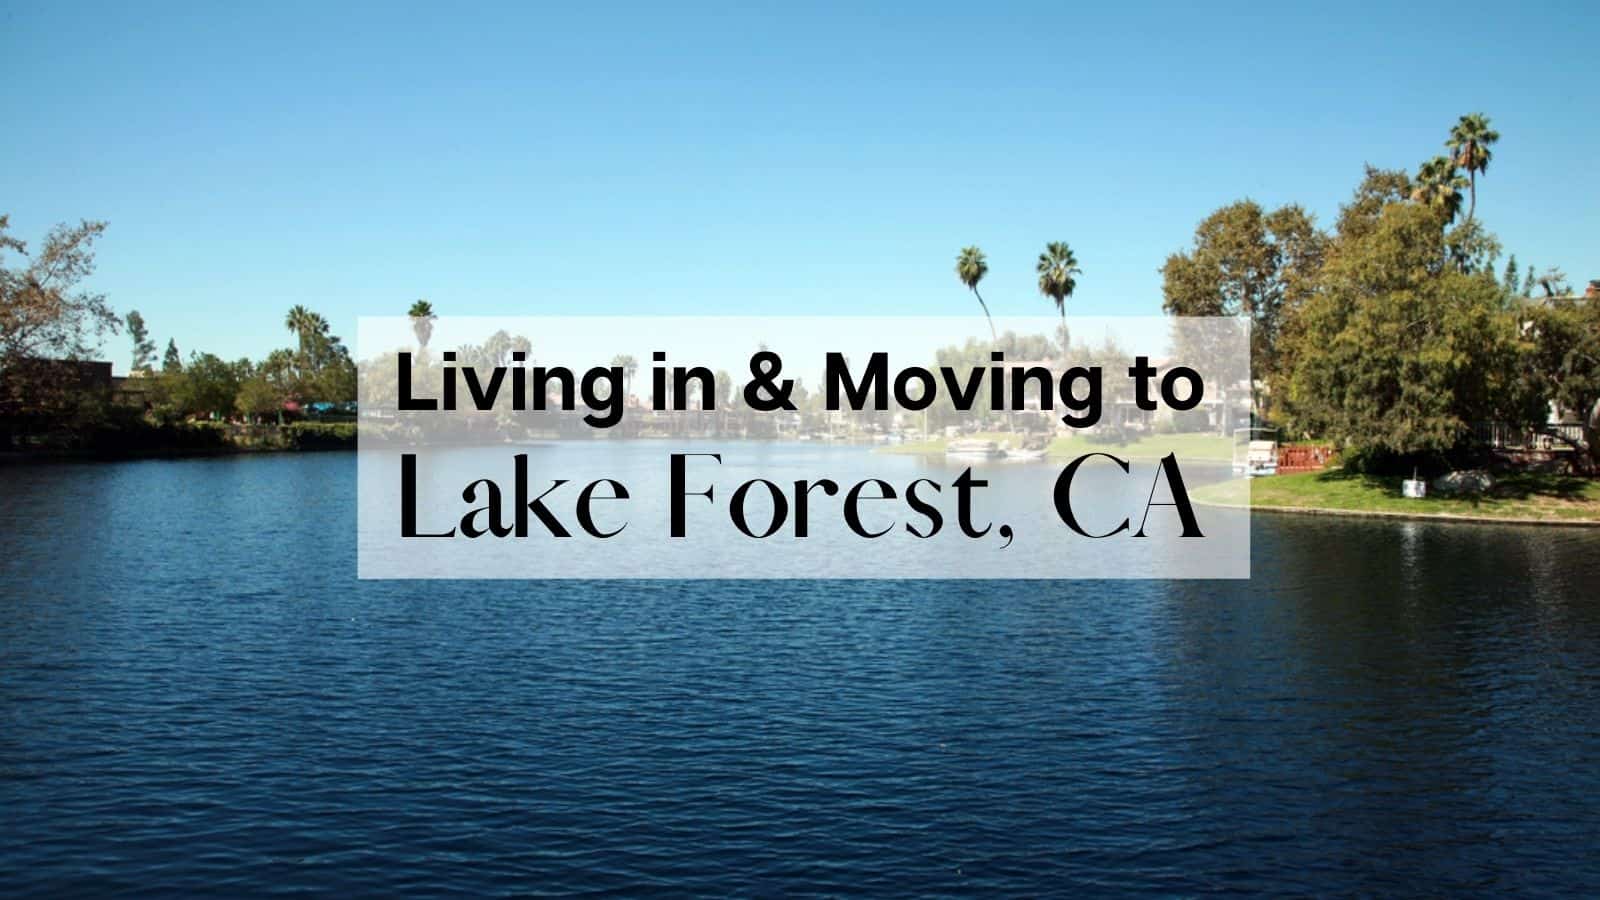 Living in & Moving to Lake Forest, CA